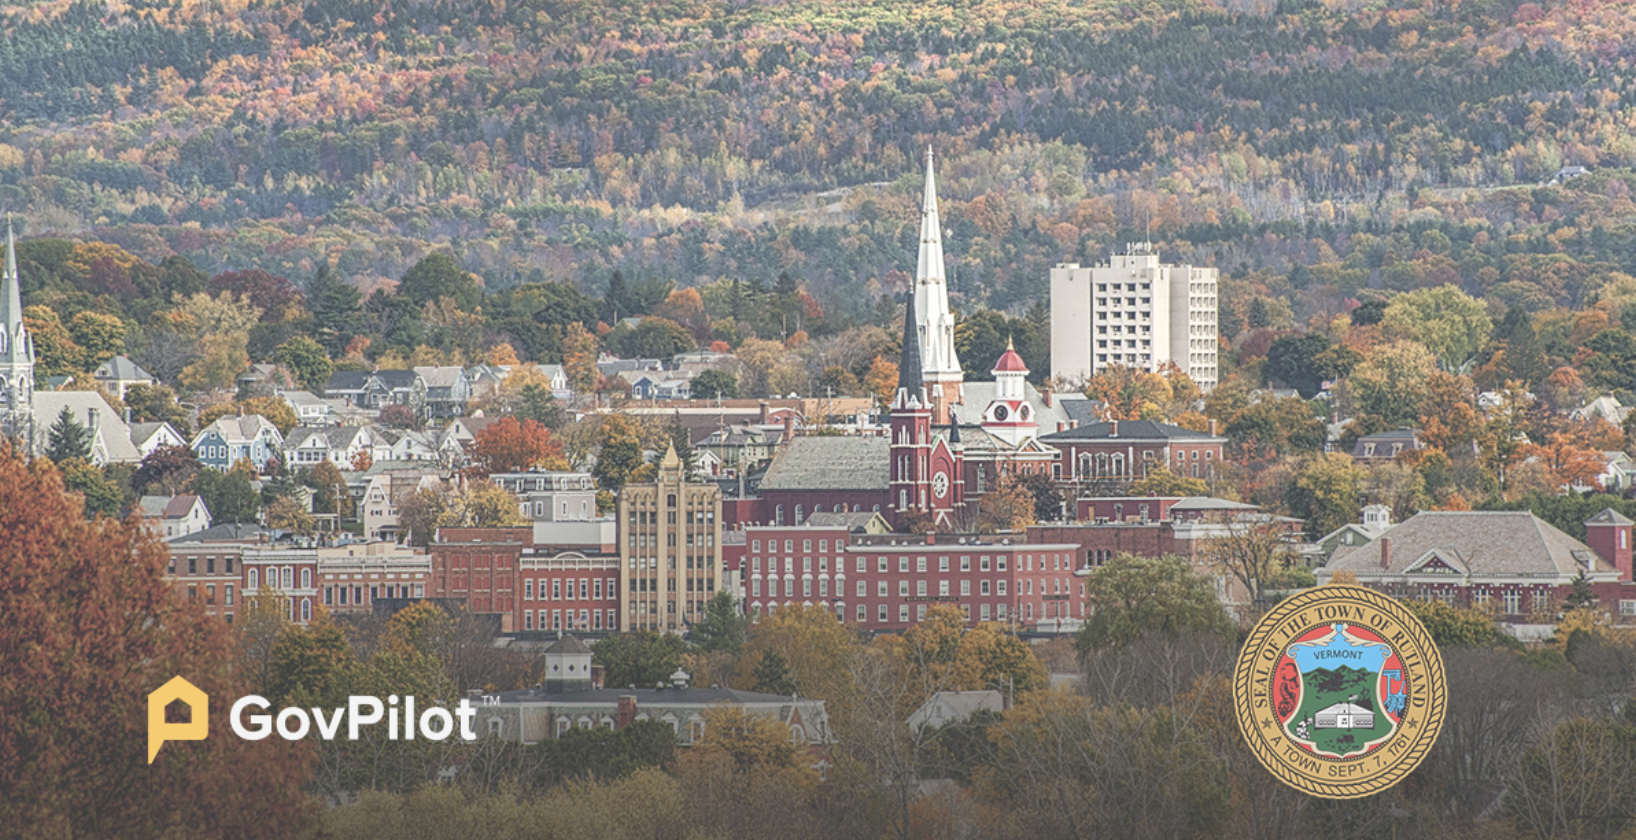 Rutland, Vermont Deploys Government Management Software Across Departments With GovPilot’s Unlimited Plan